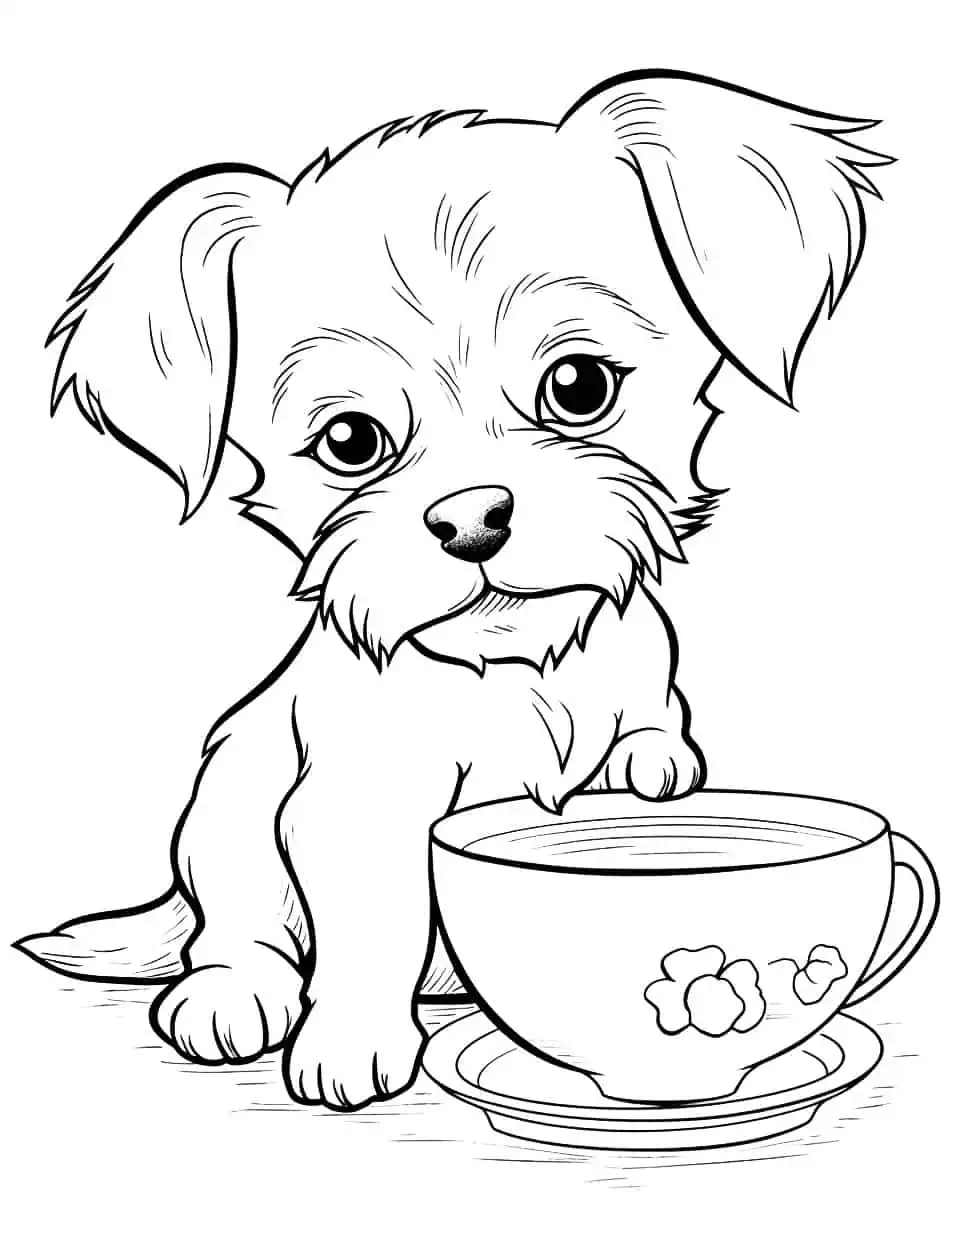 Yorkie and a Teacup Coloring Page - A tiny Yorkie puppy sitting next to a teacup, looking adorable.